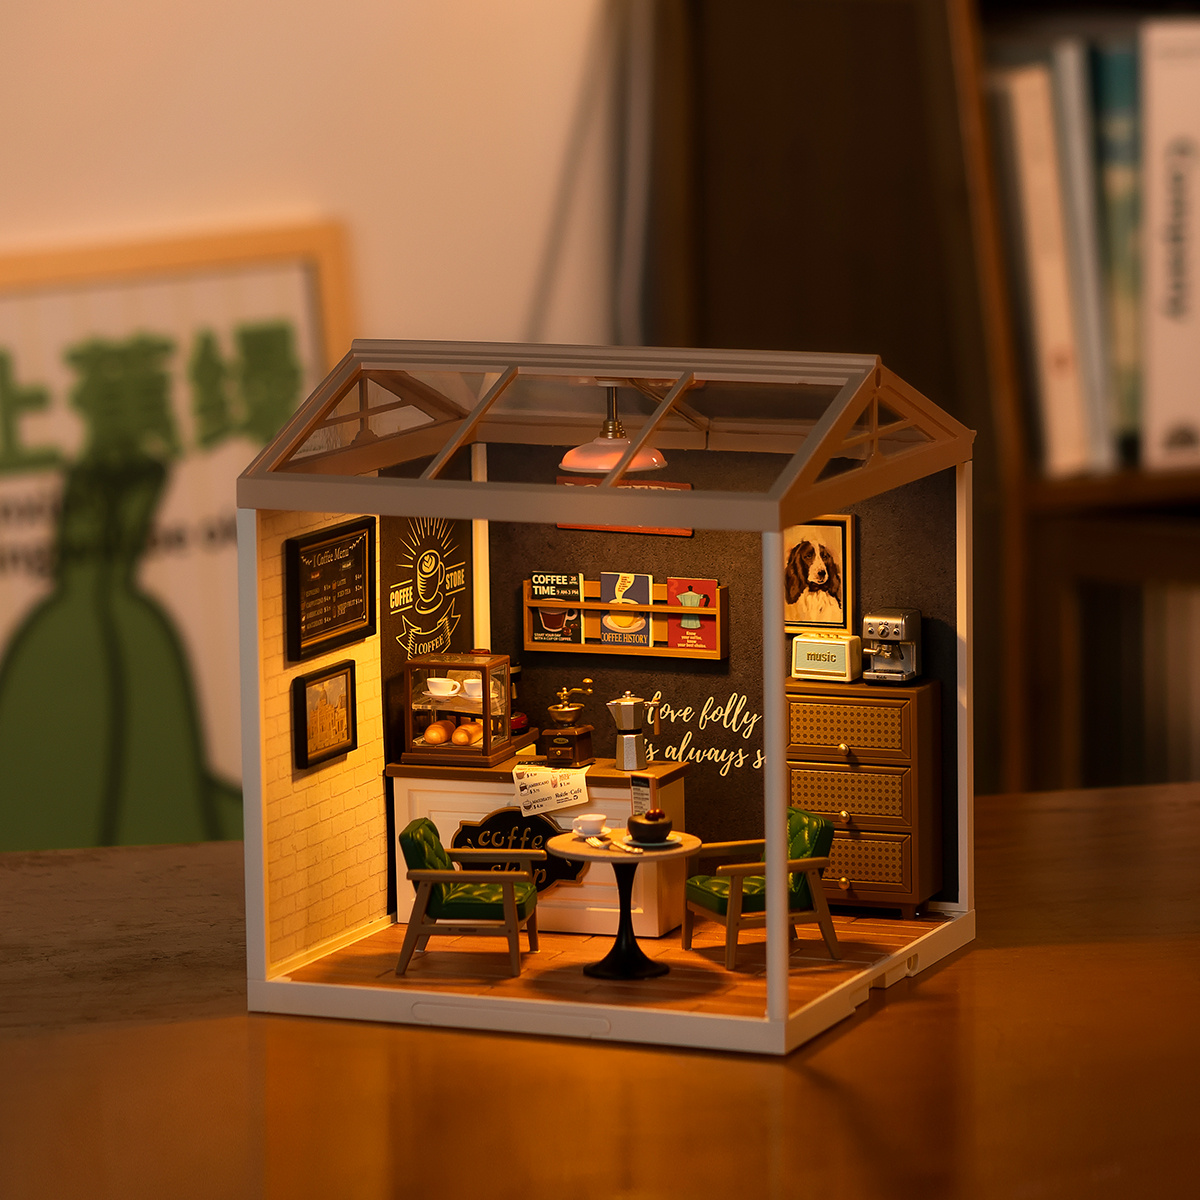 Rolife Plastic Miniature House - Daily Inspiration Cafe DW001B